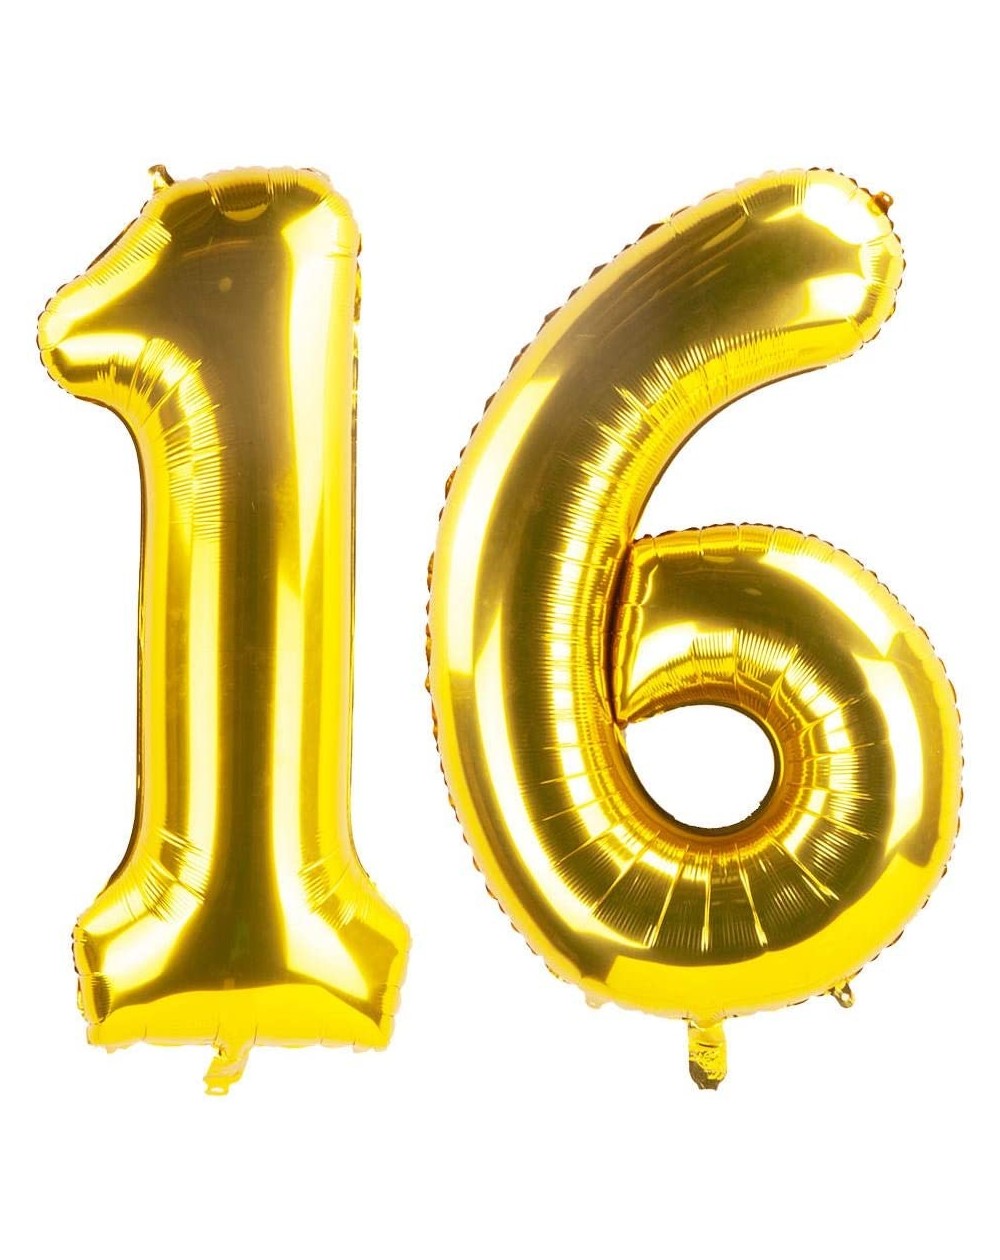 Balloons 40 Inch Gold 16th Birthday Number Balloons 16 Foil Balloon for Birthday Anniversary Party Decoration - Gold-16 - C71...